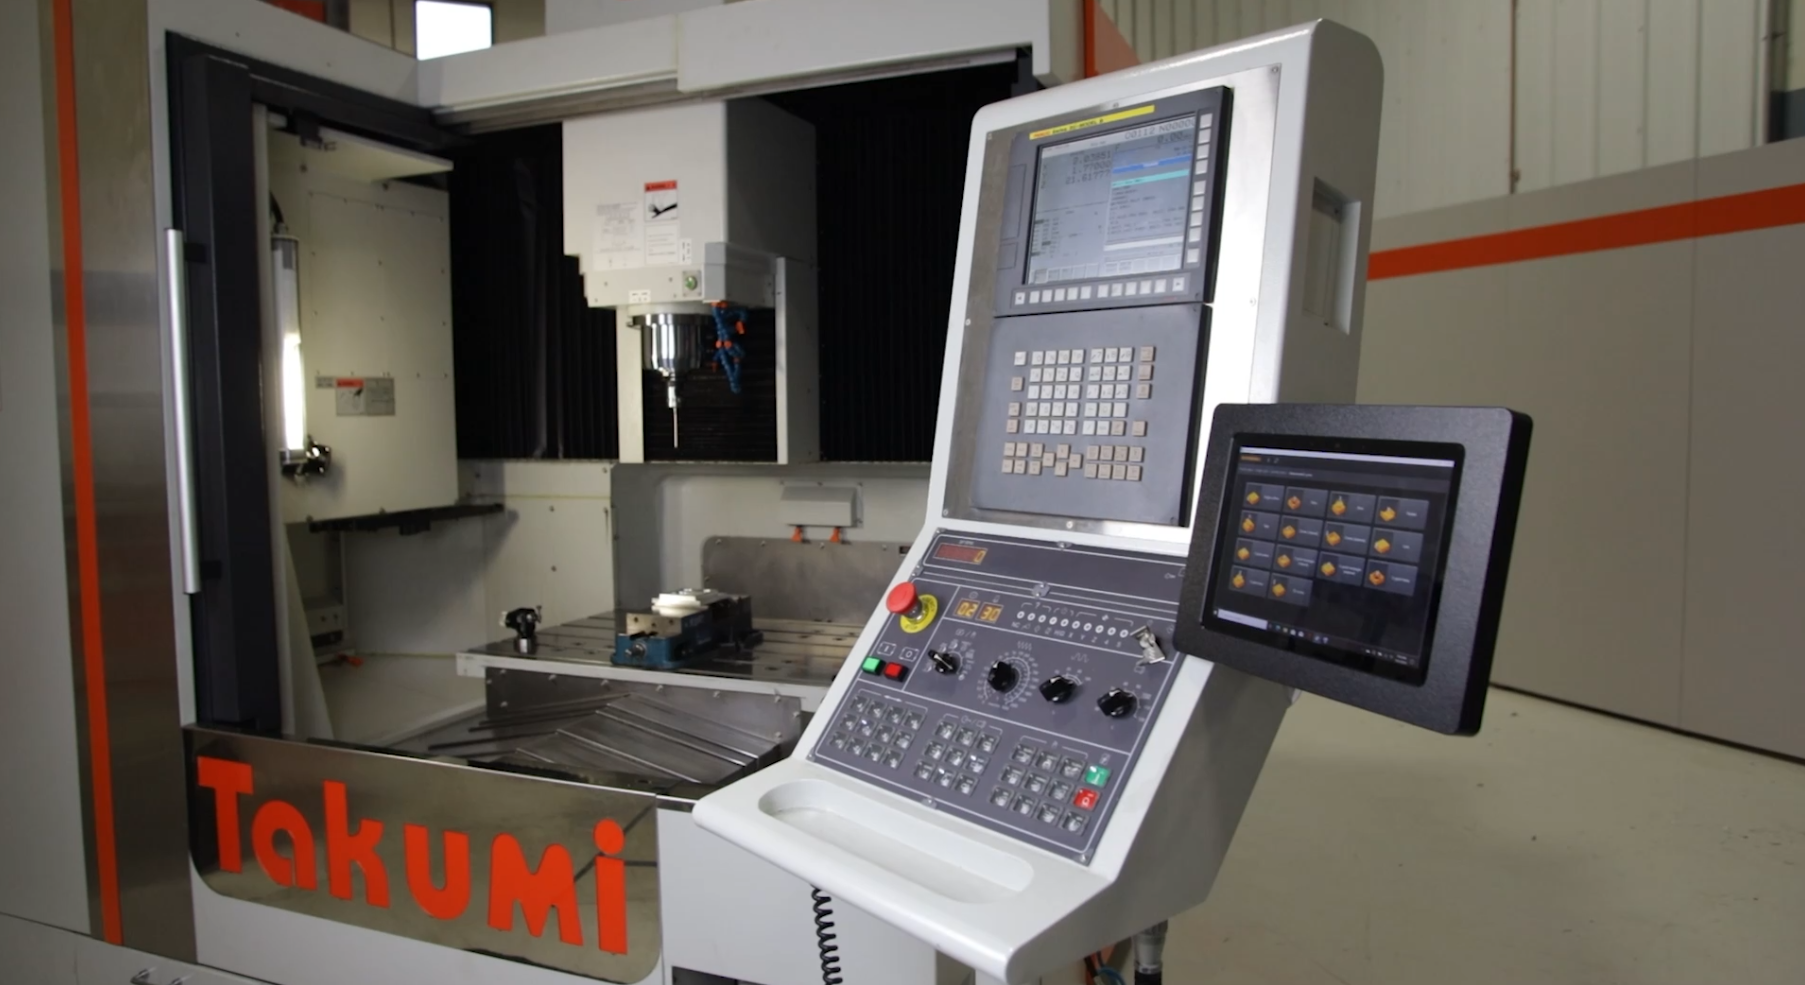 Takumi USA has partnered with Renishaw to be the first CNC machine tool brand to offer Renishaw’s Set and Inspect app for the Fanuc control.